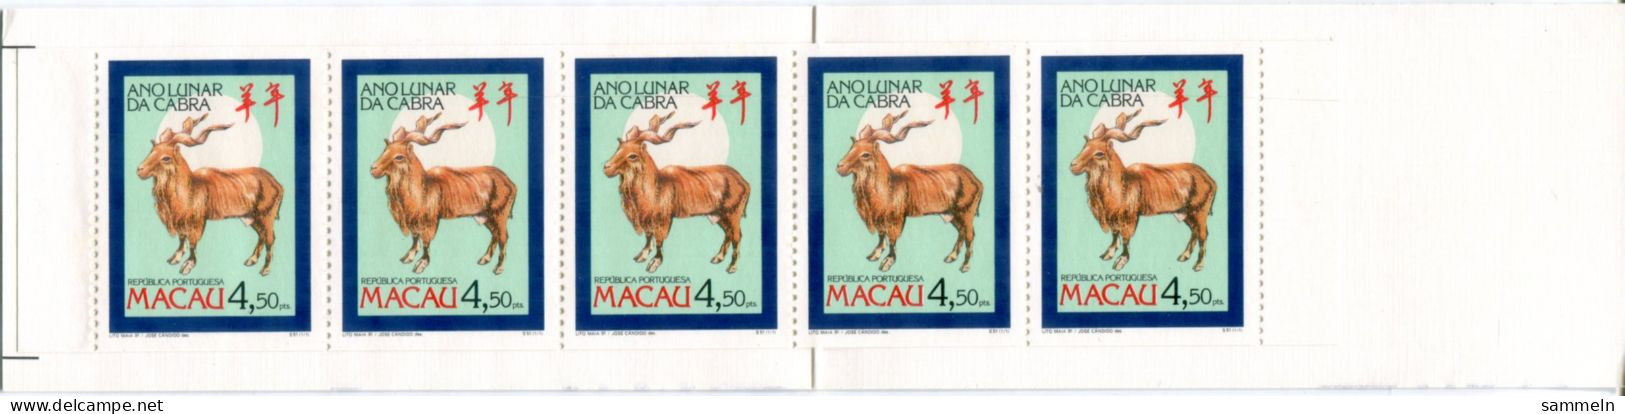 MACAO 667 C MH Mnh - Chinesisches Jahr Des Schafes, Chinese Year Of The Sheep, Année Chinoise Du Mouton - MACAU - Libretti